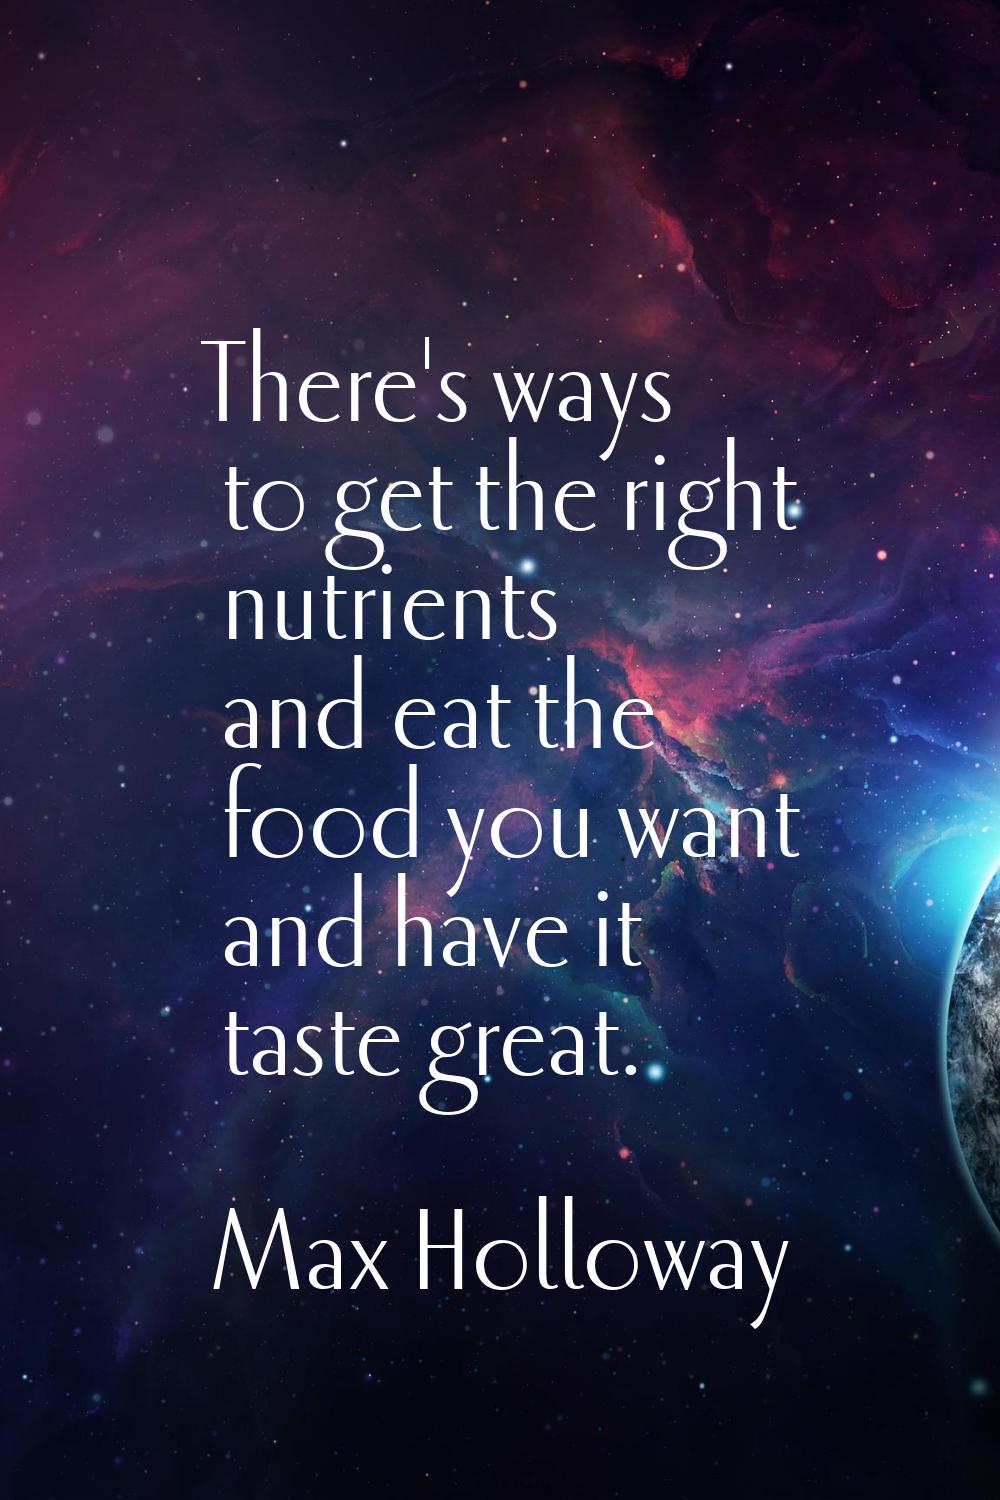 There's ways to get the right nutrients and eat the food you want and have it taste great.